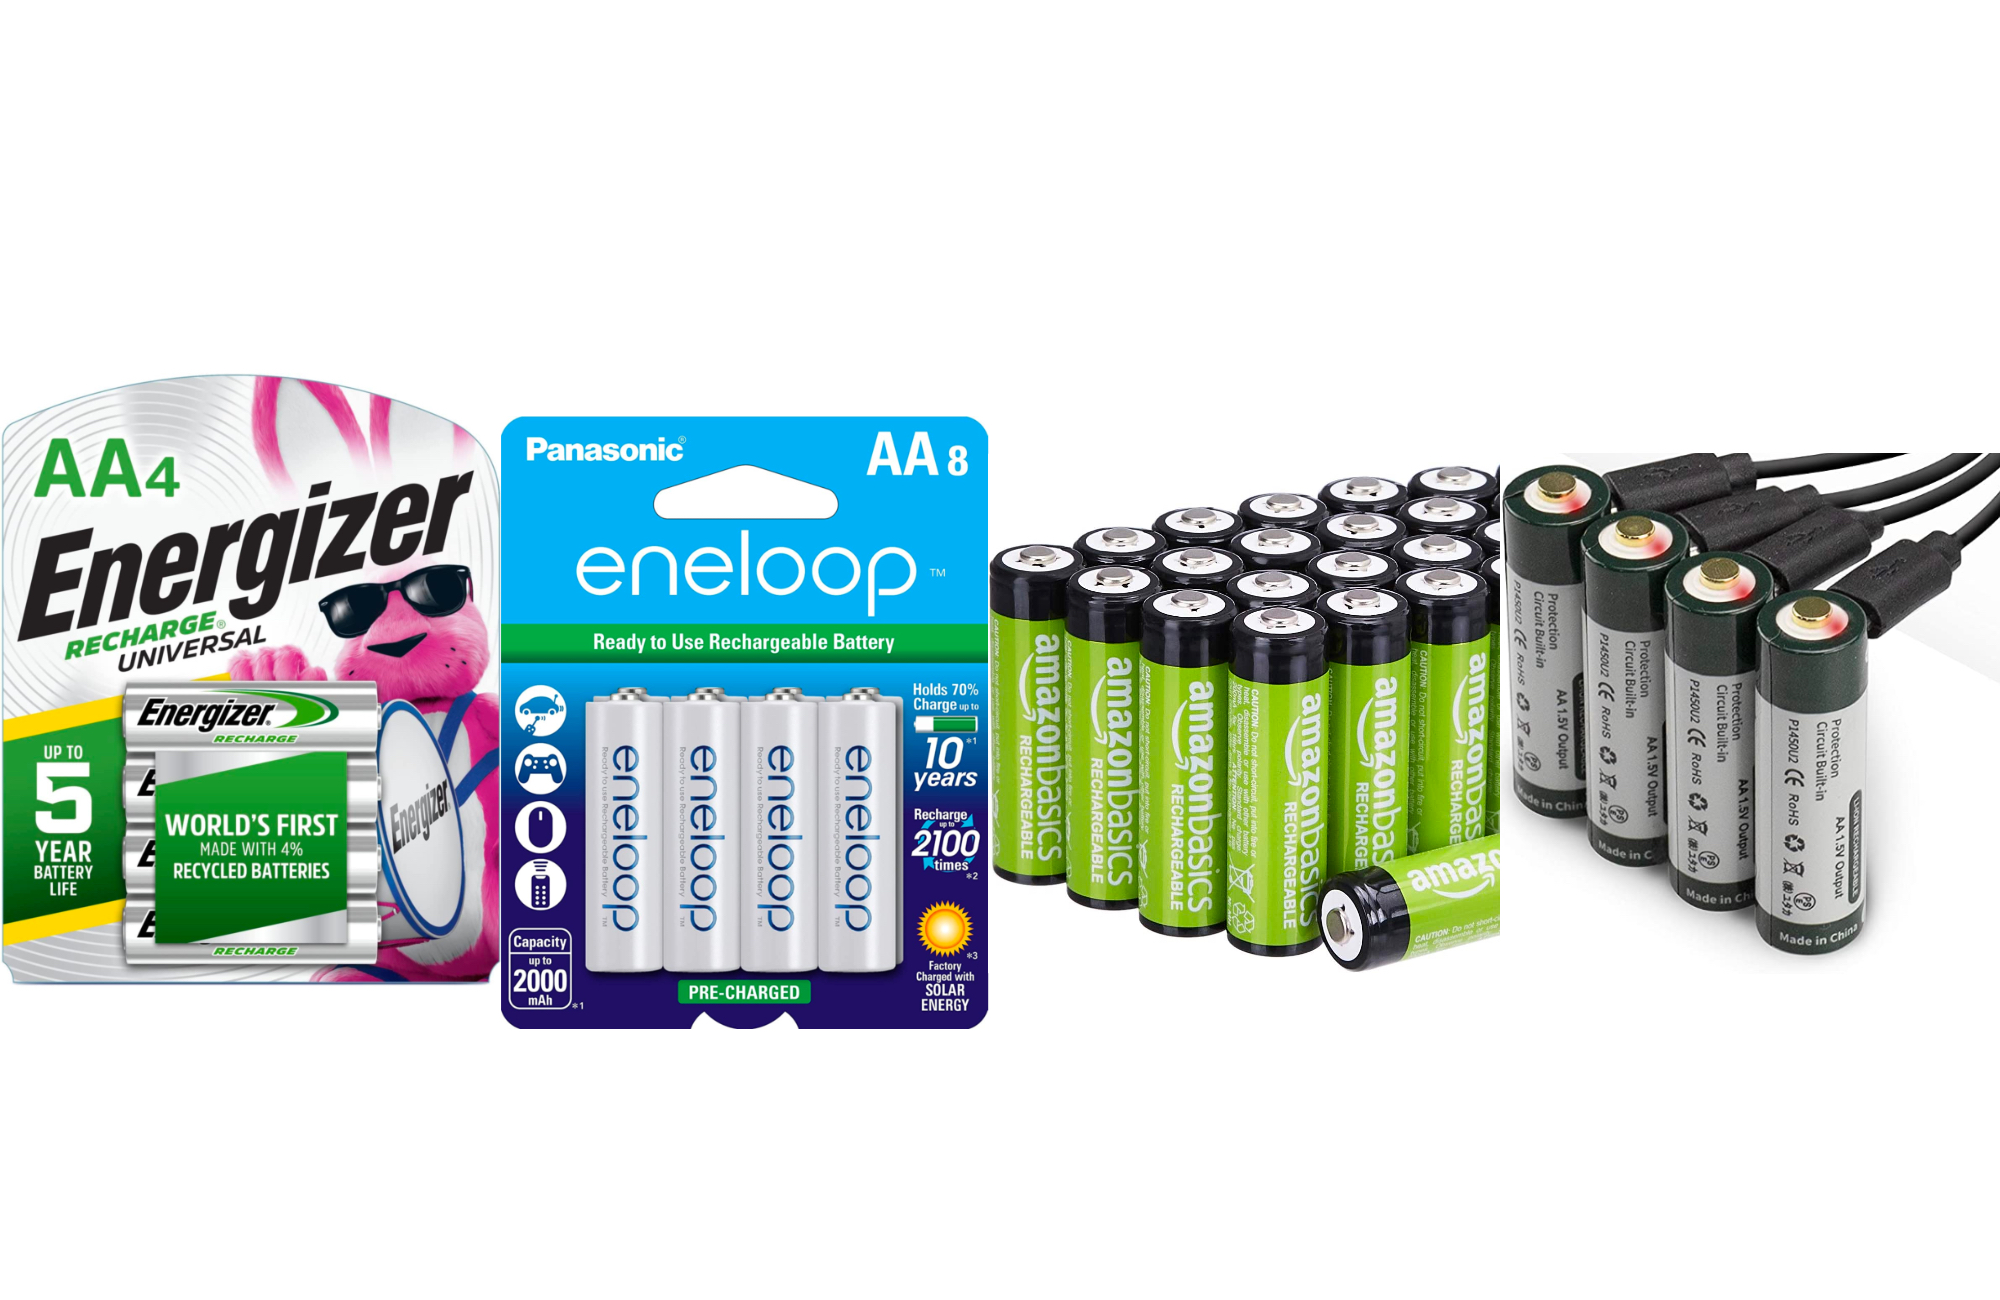 A Guide to D Batteries and Rechargeable D Batteries